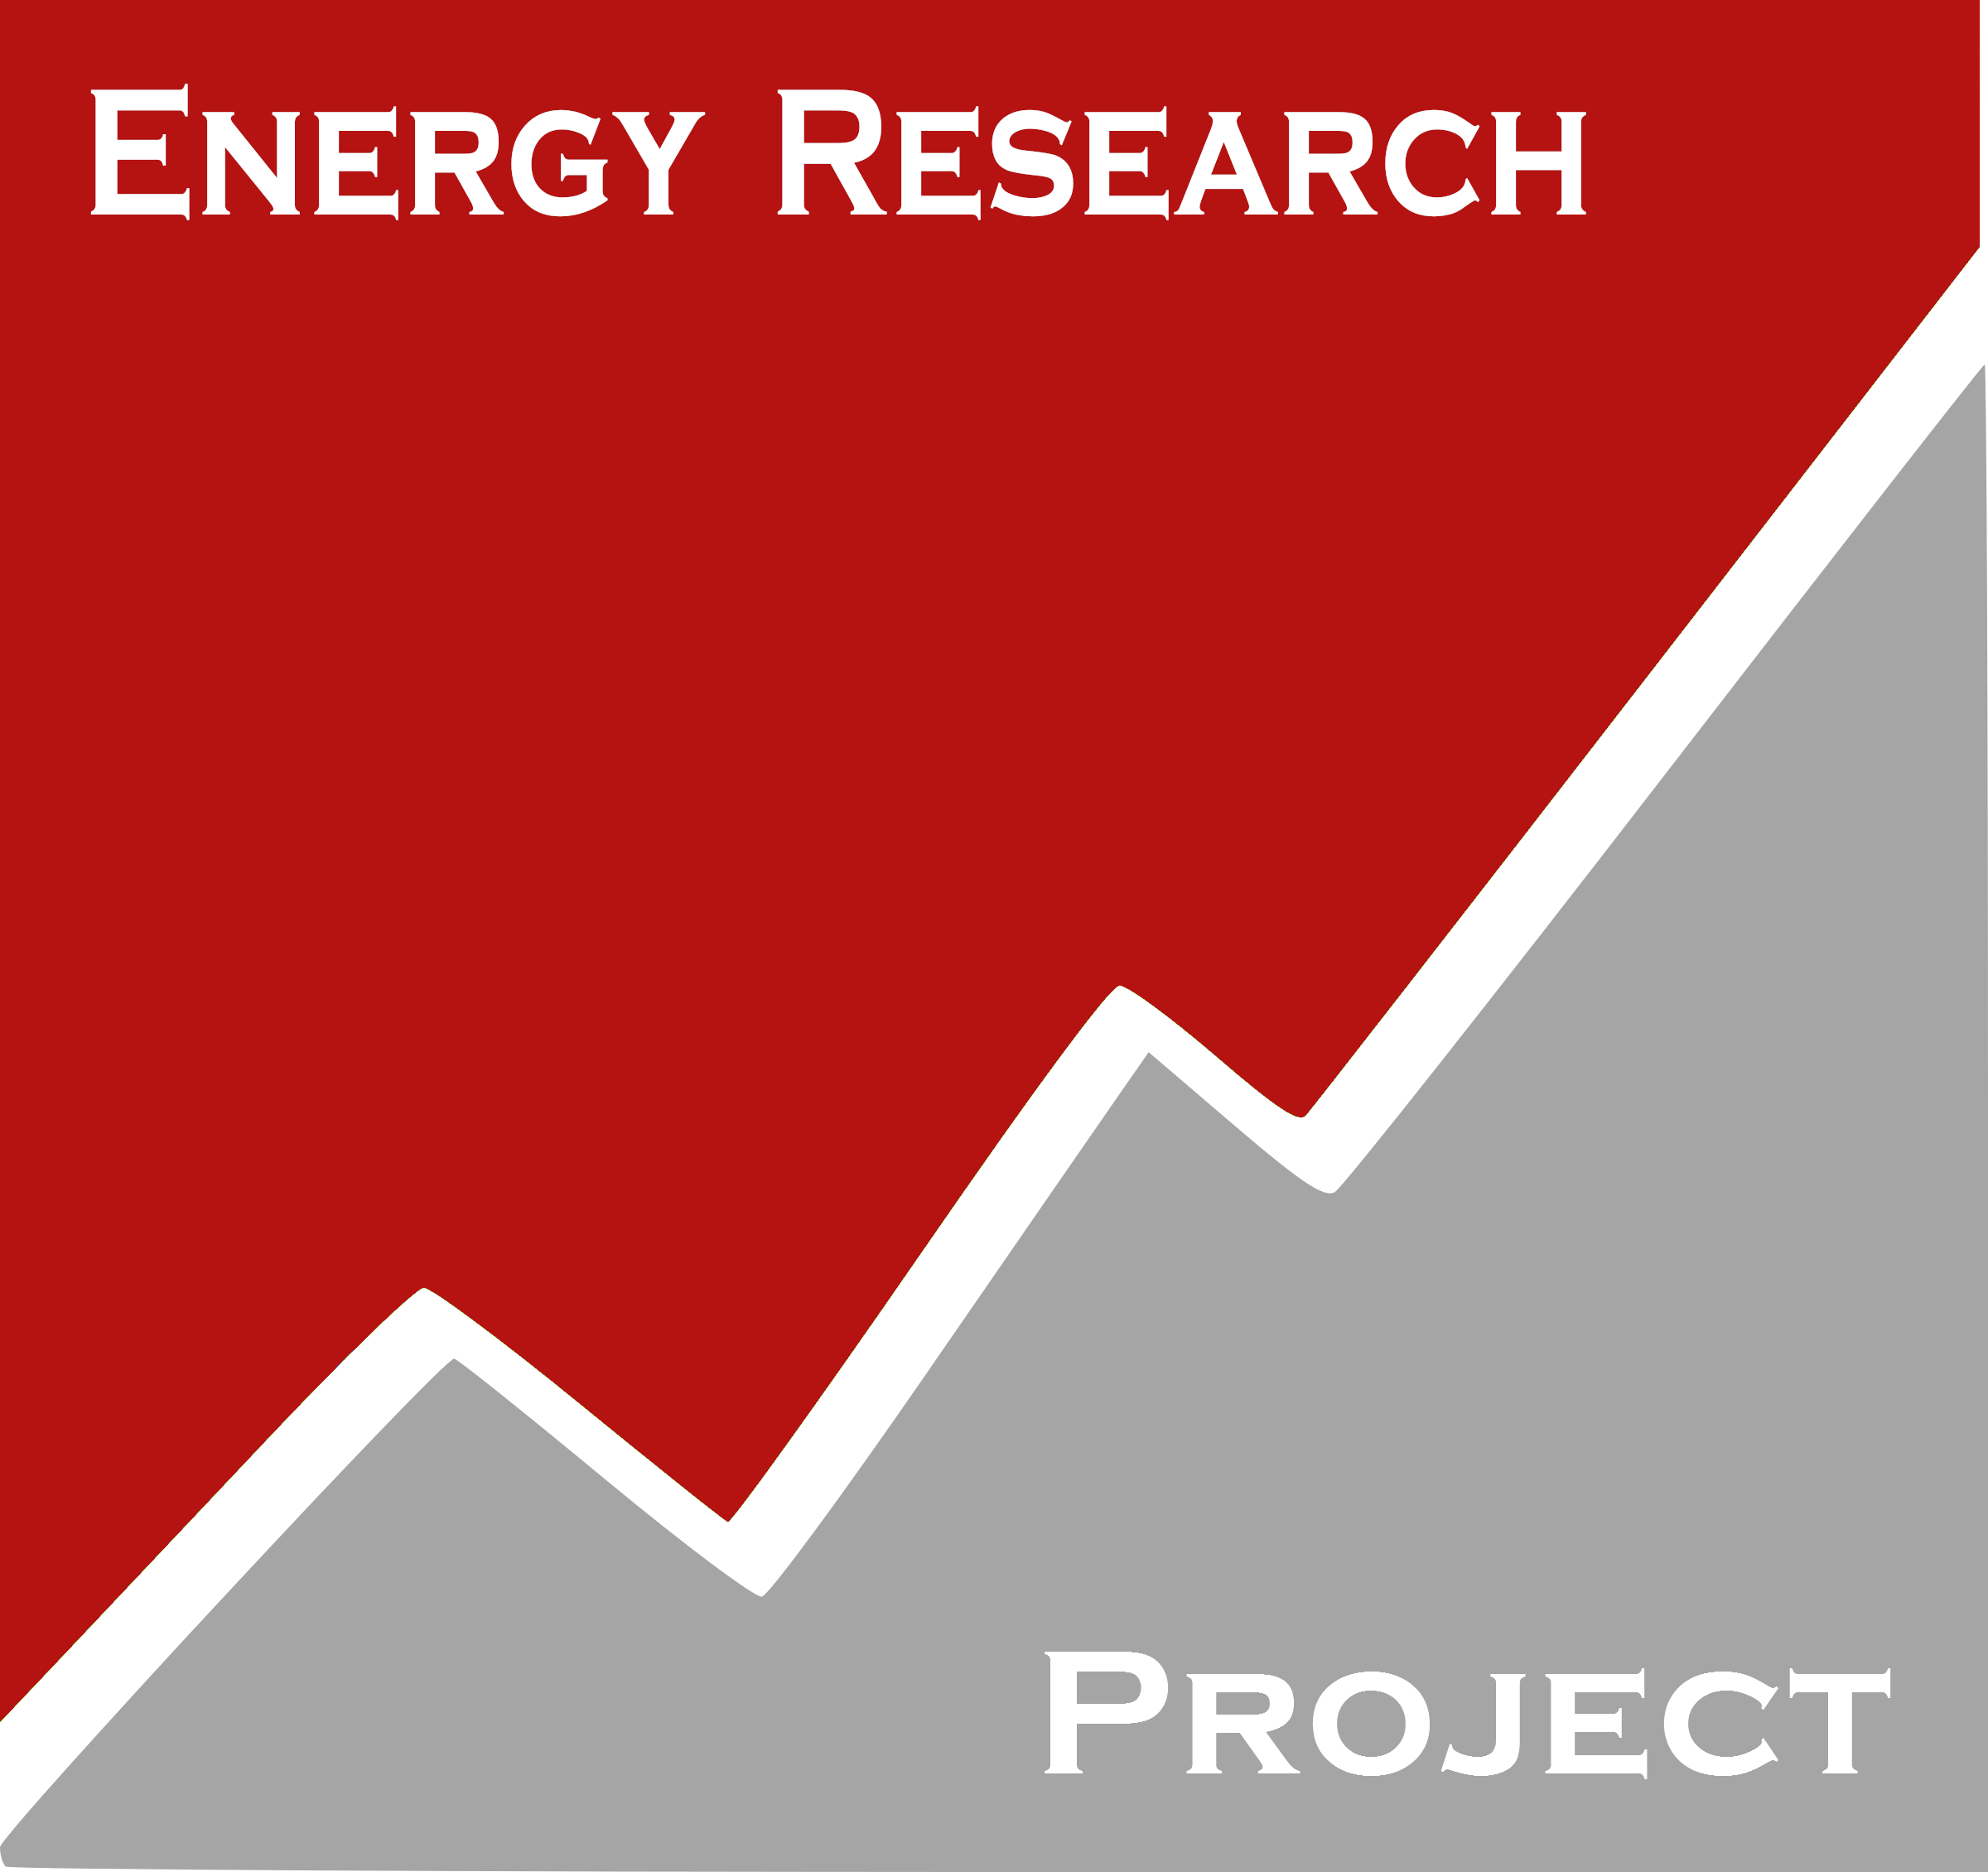 Energy Research Project